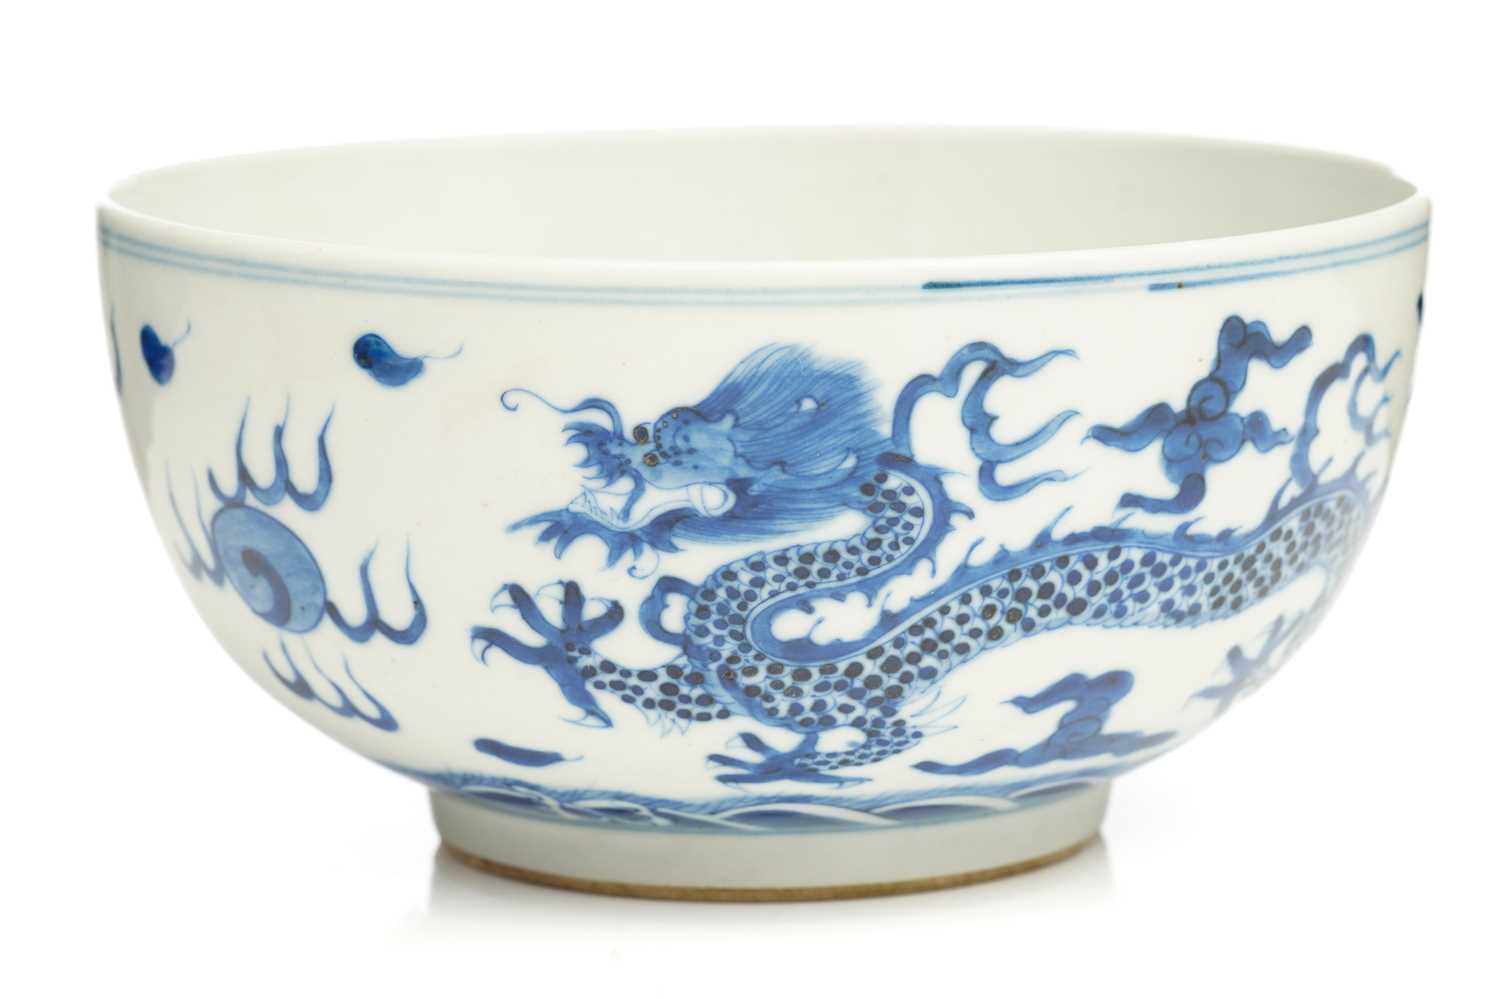 A Chinese porcelain blue & white dragon bowl, the interior with a single writhing dragon, the